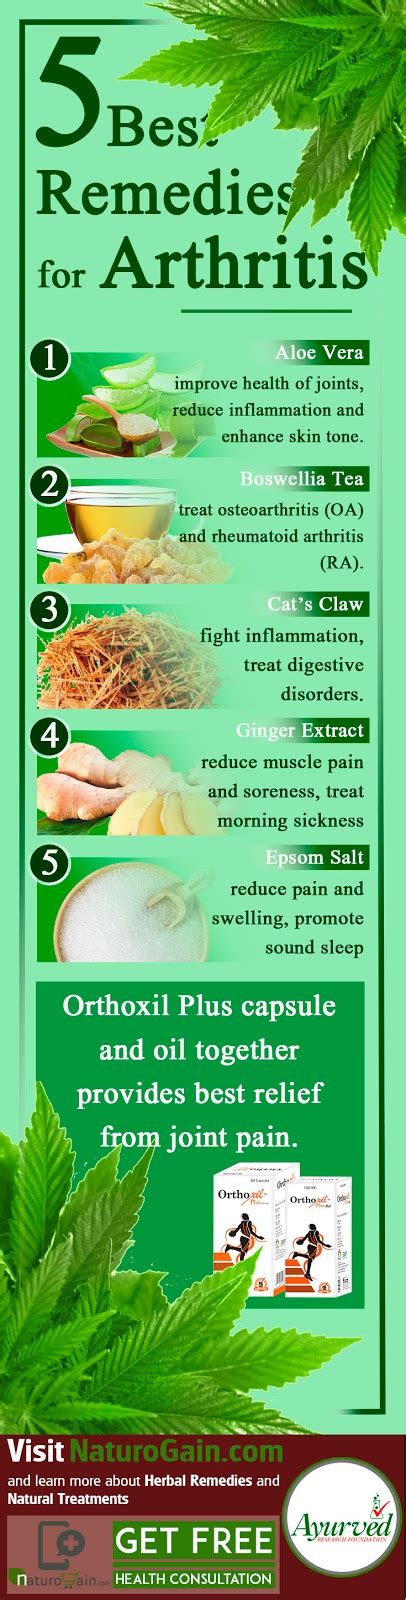 Arthritis Herbal Remedies that Work for Joint Pain Natural Treatment